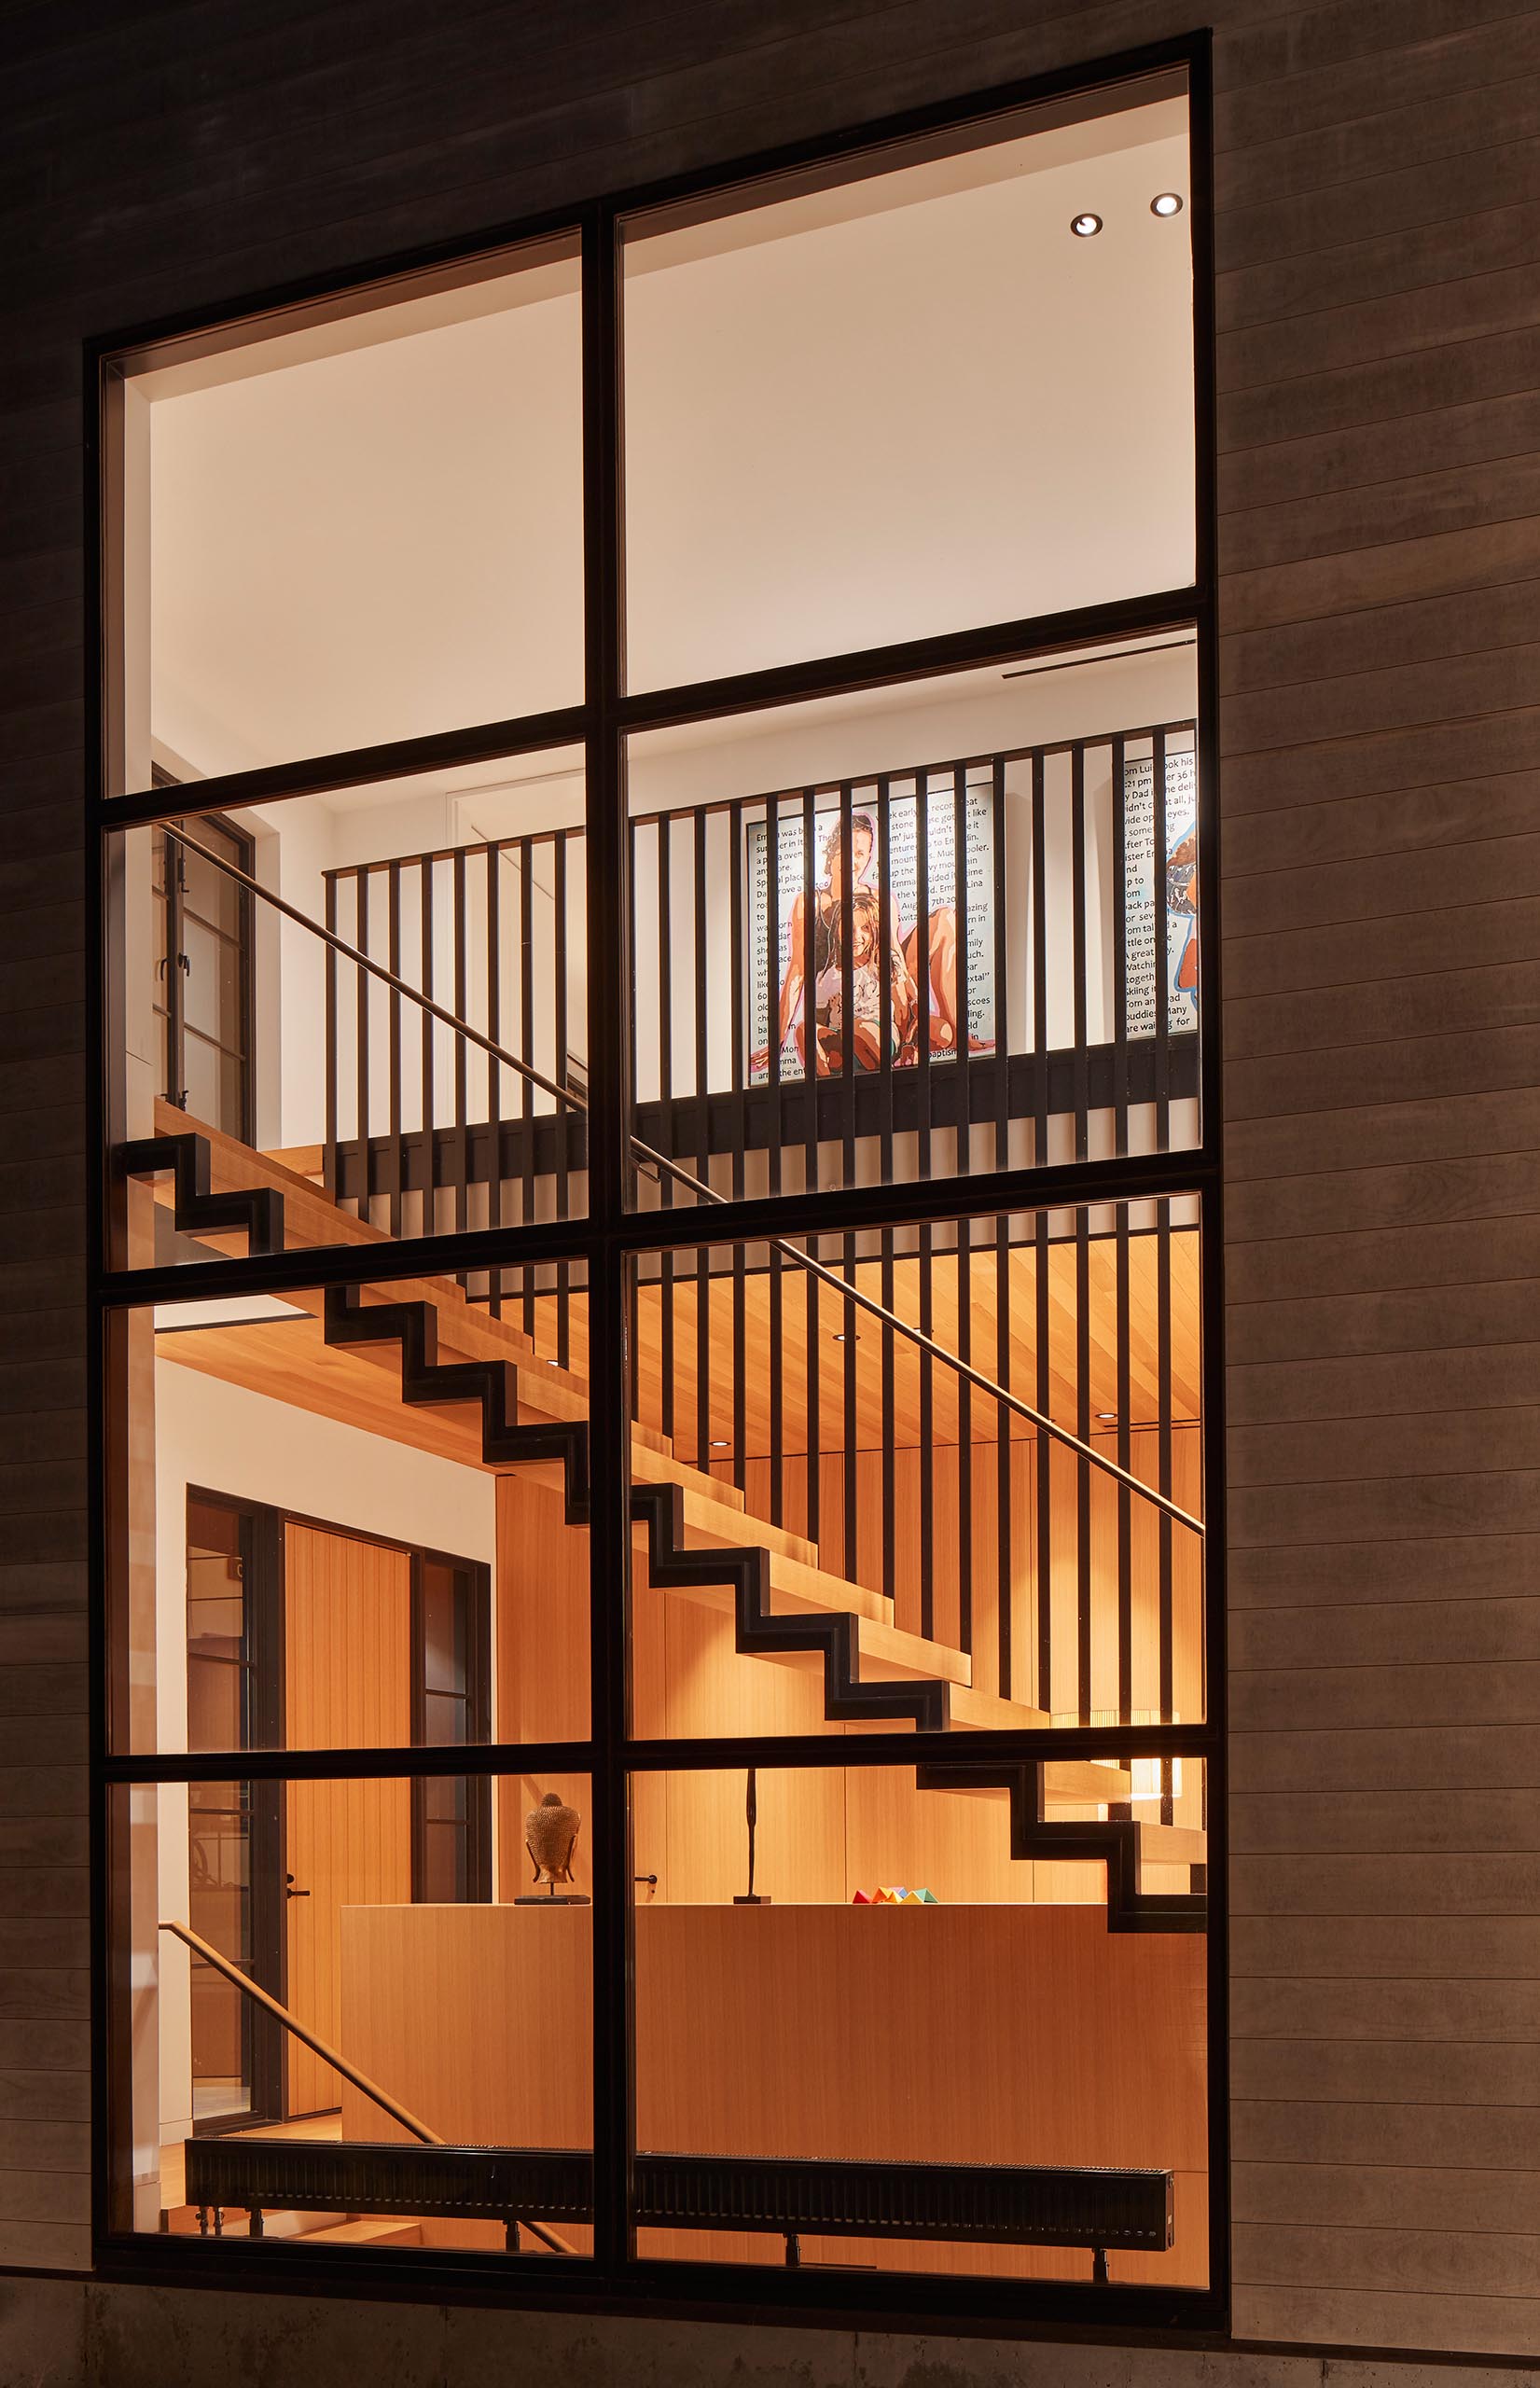 Large windows showcase a steel and wood staircase inside the home.